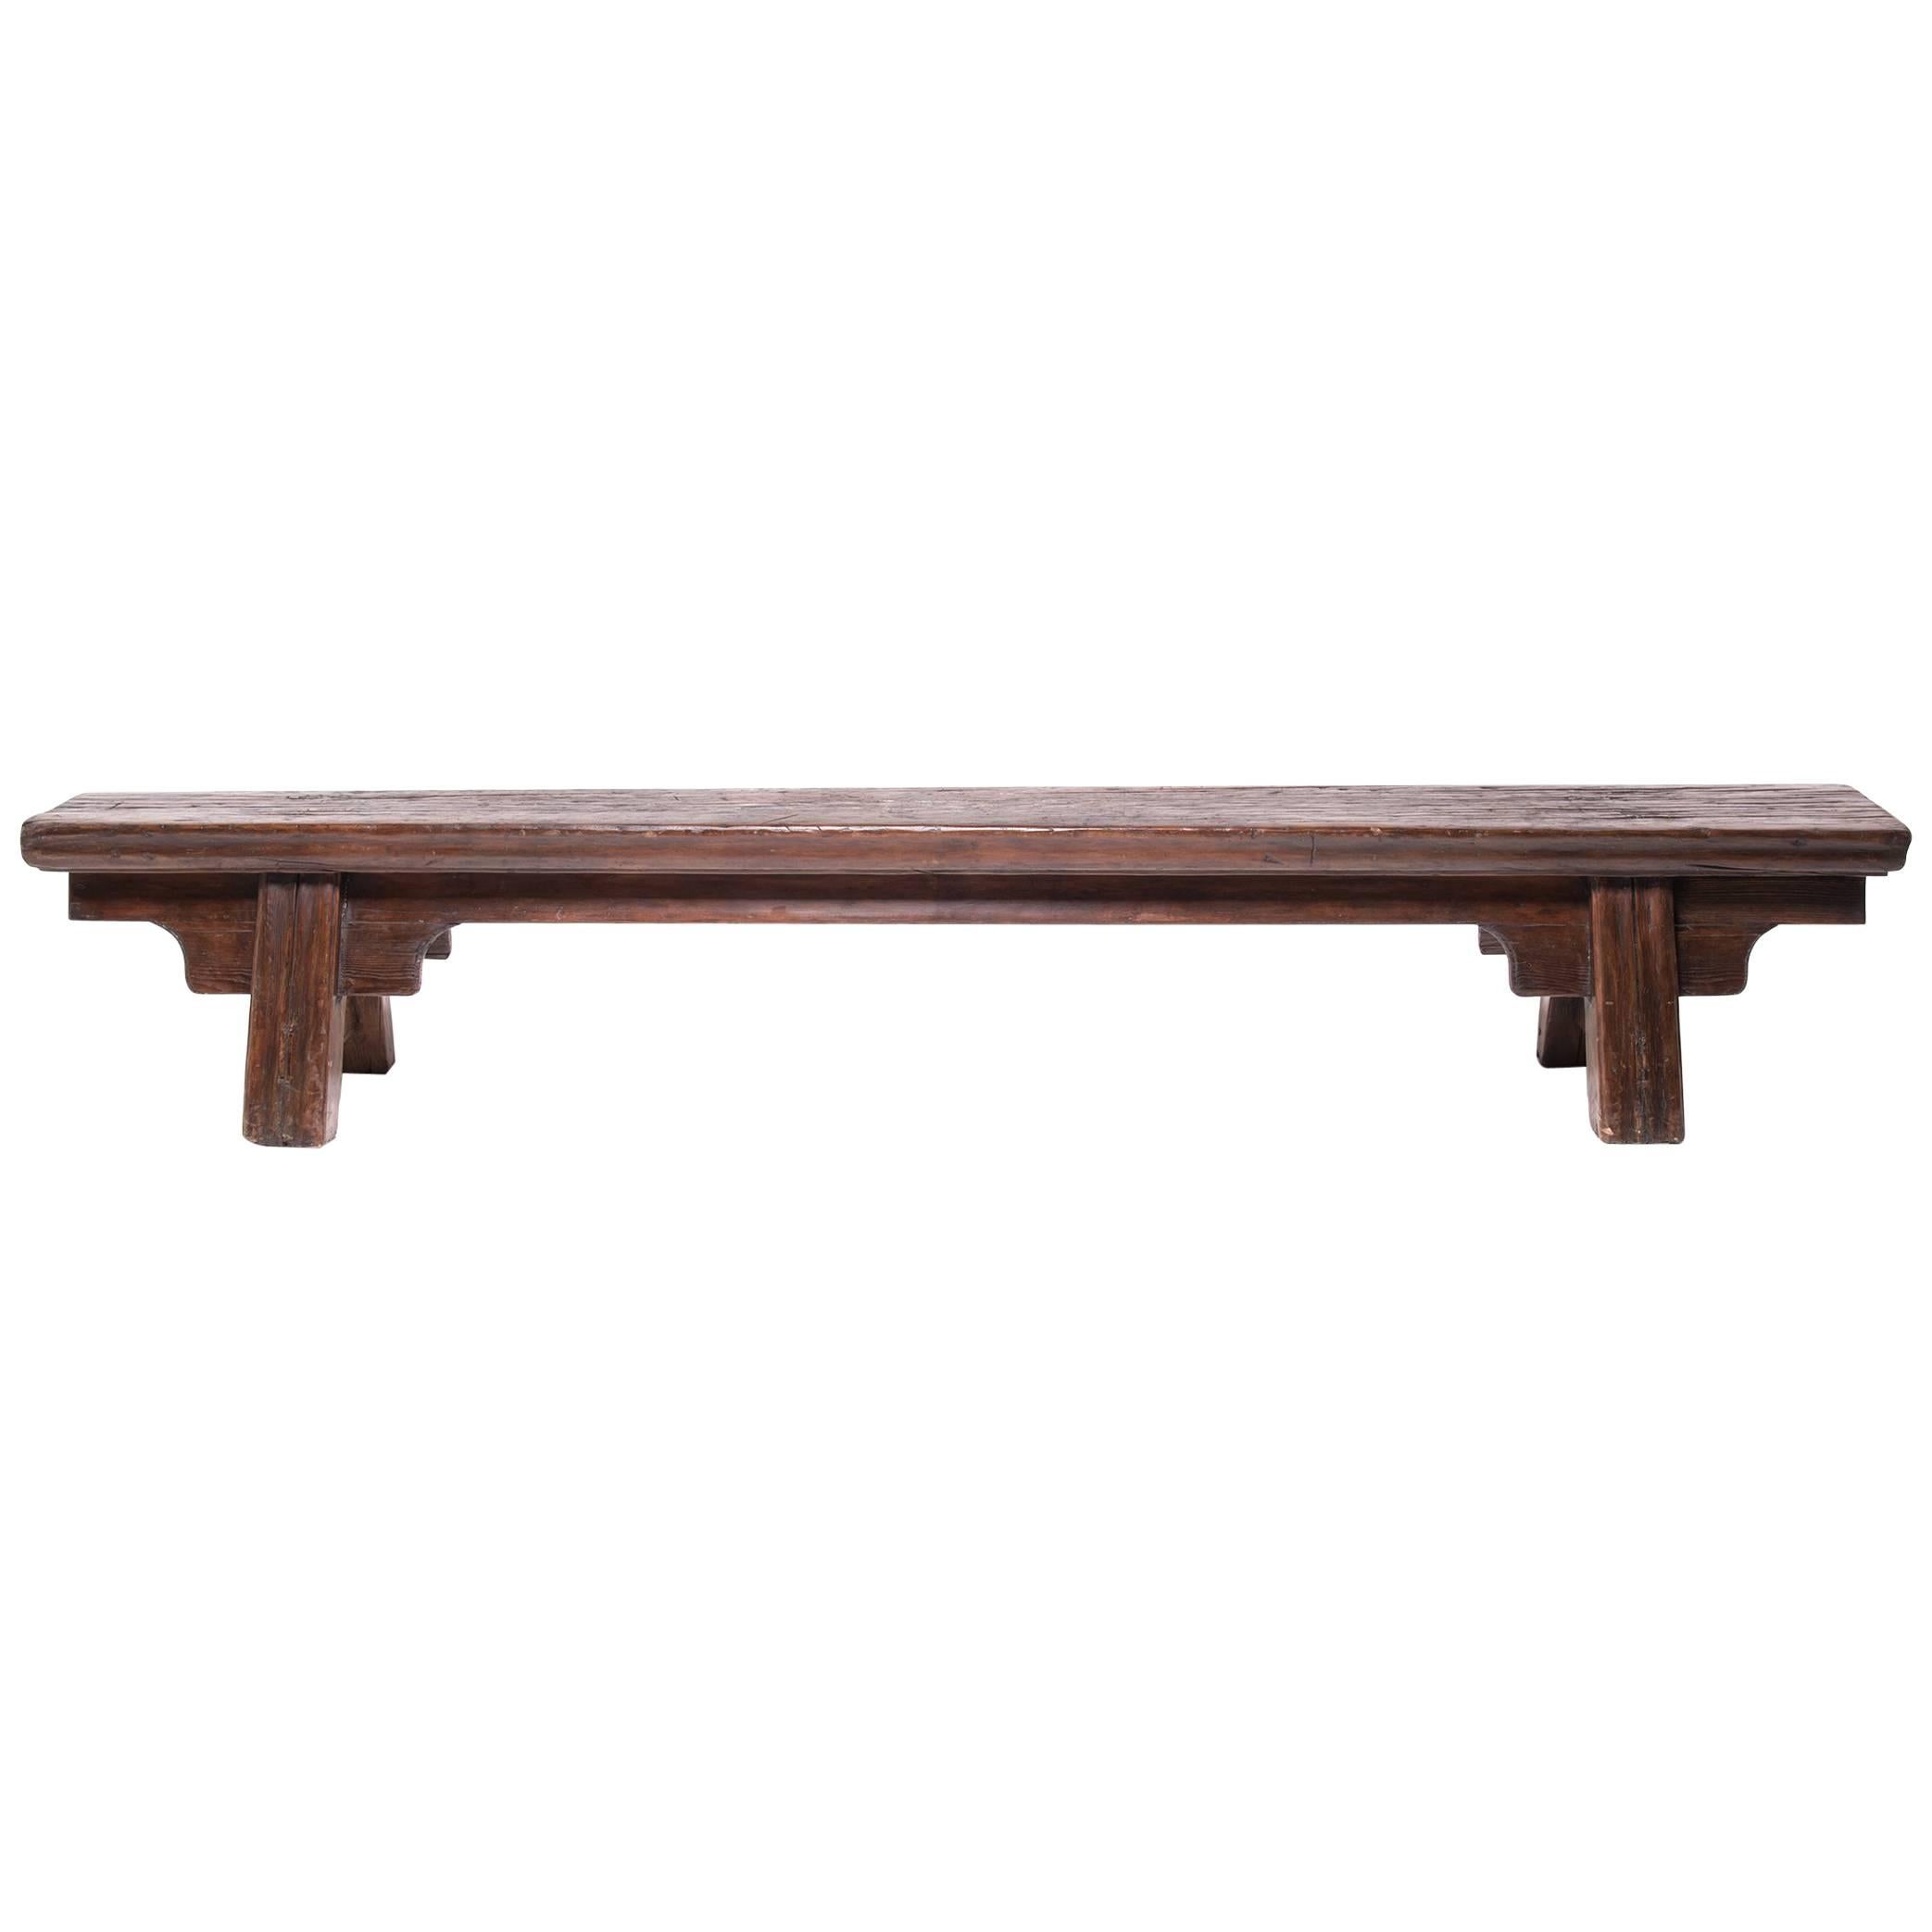 Provincial Chinese Elmwood Bench, c. 1850